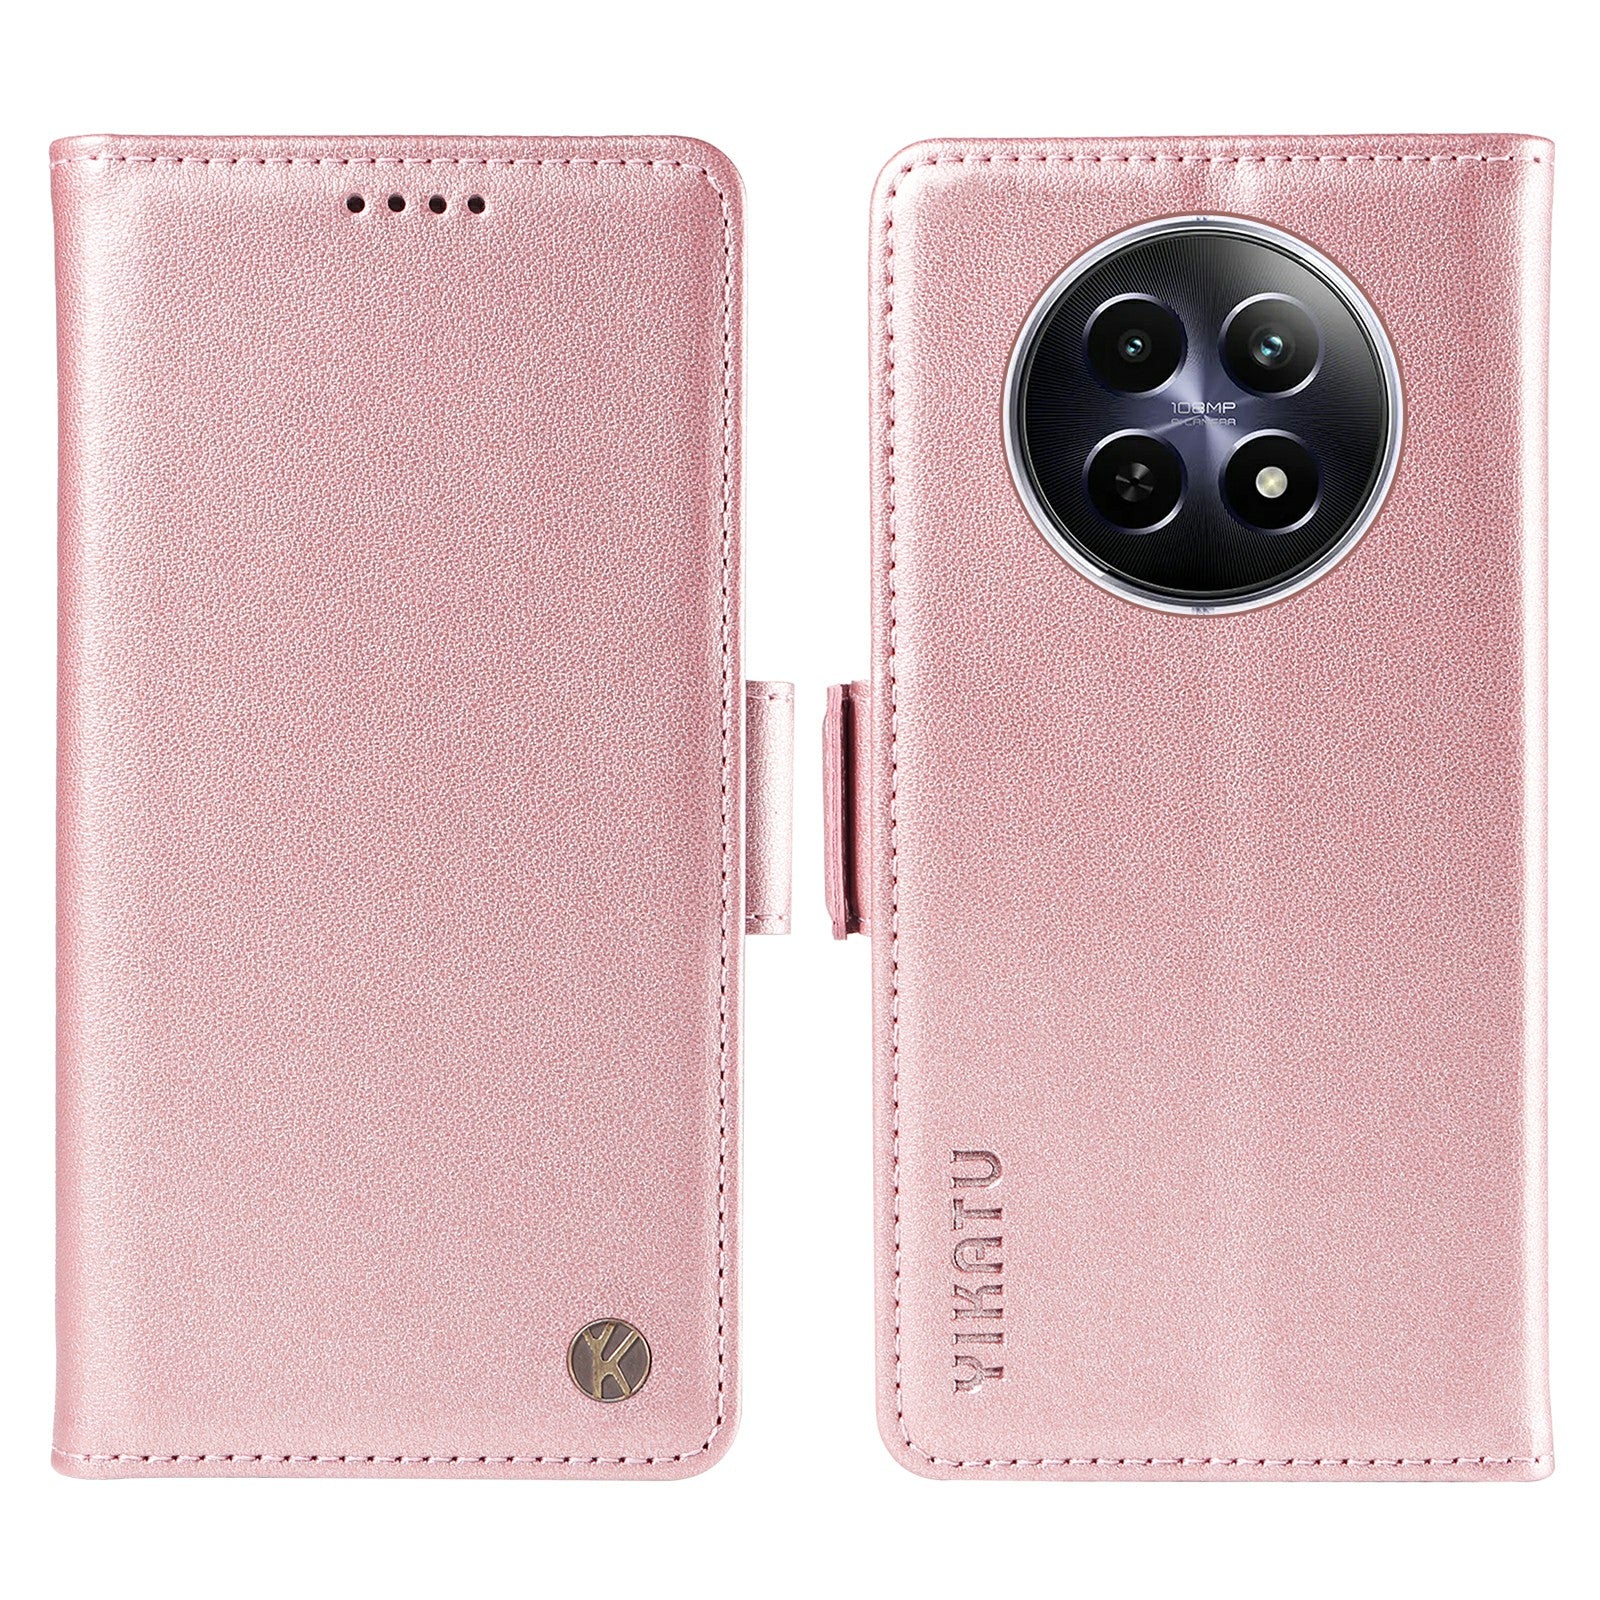 YIKATU YK-003 For Realme 12 Leather Case Wallet Cover Phone Accessories Distributors - Rose Gold